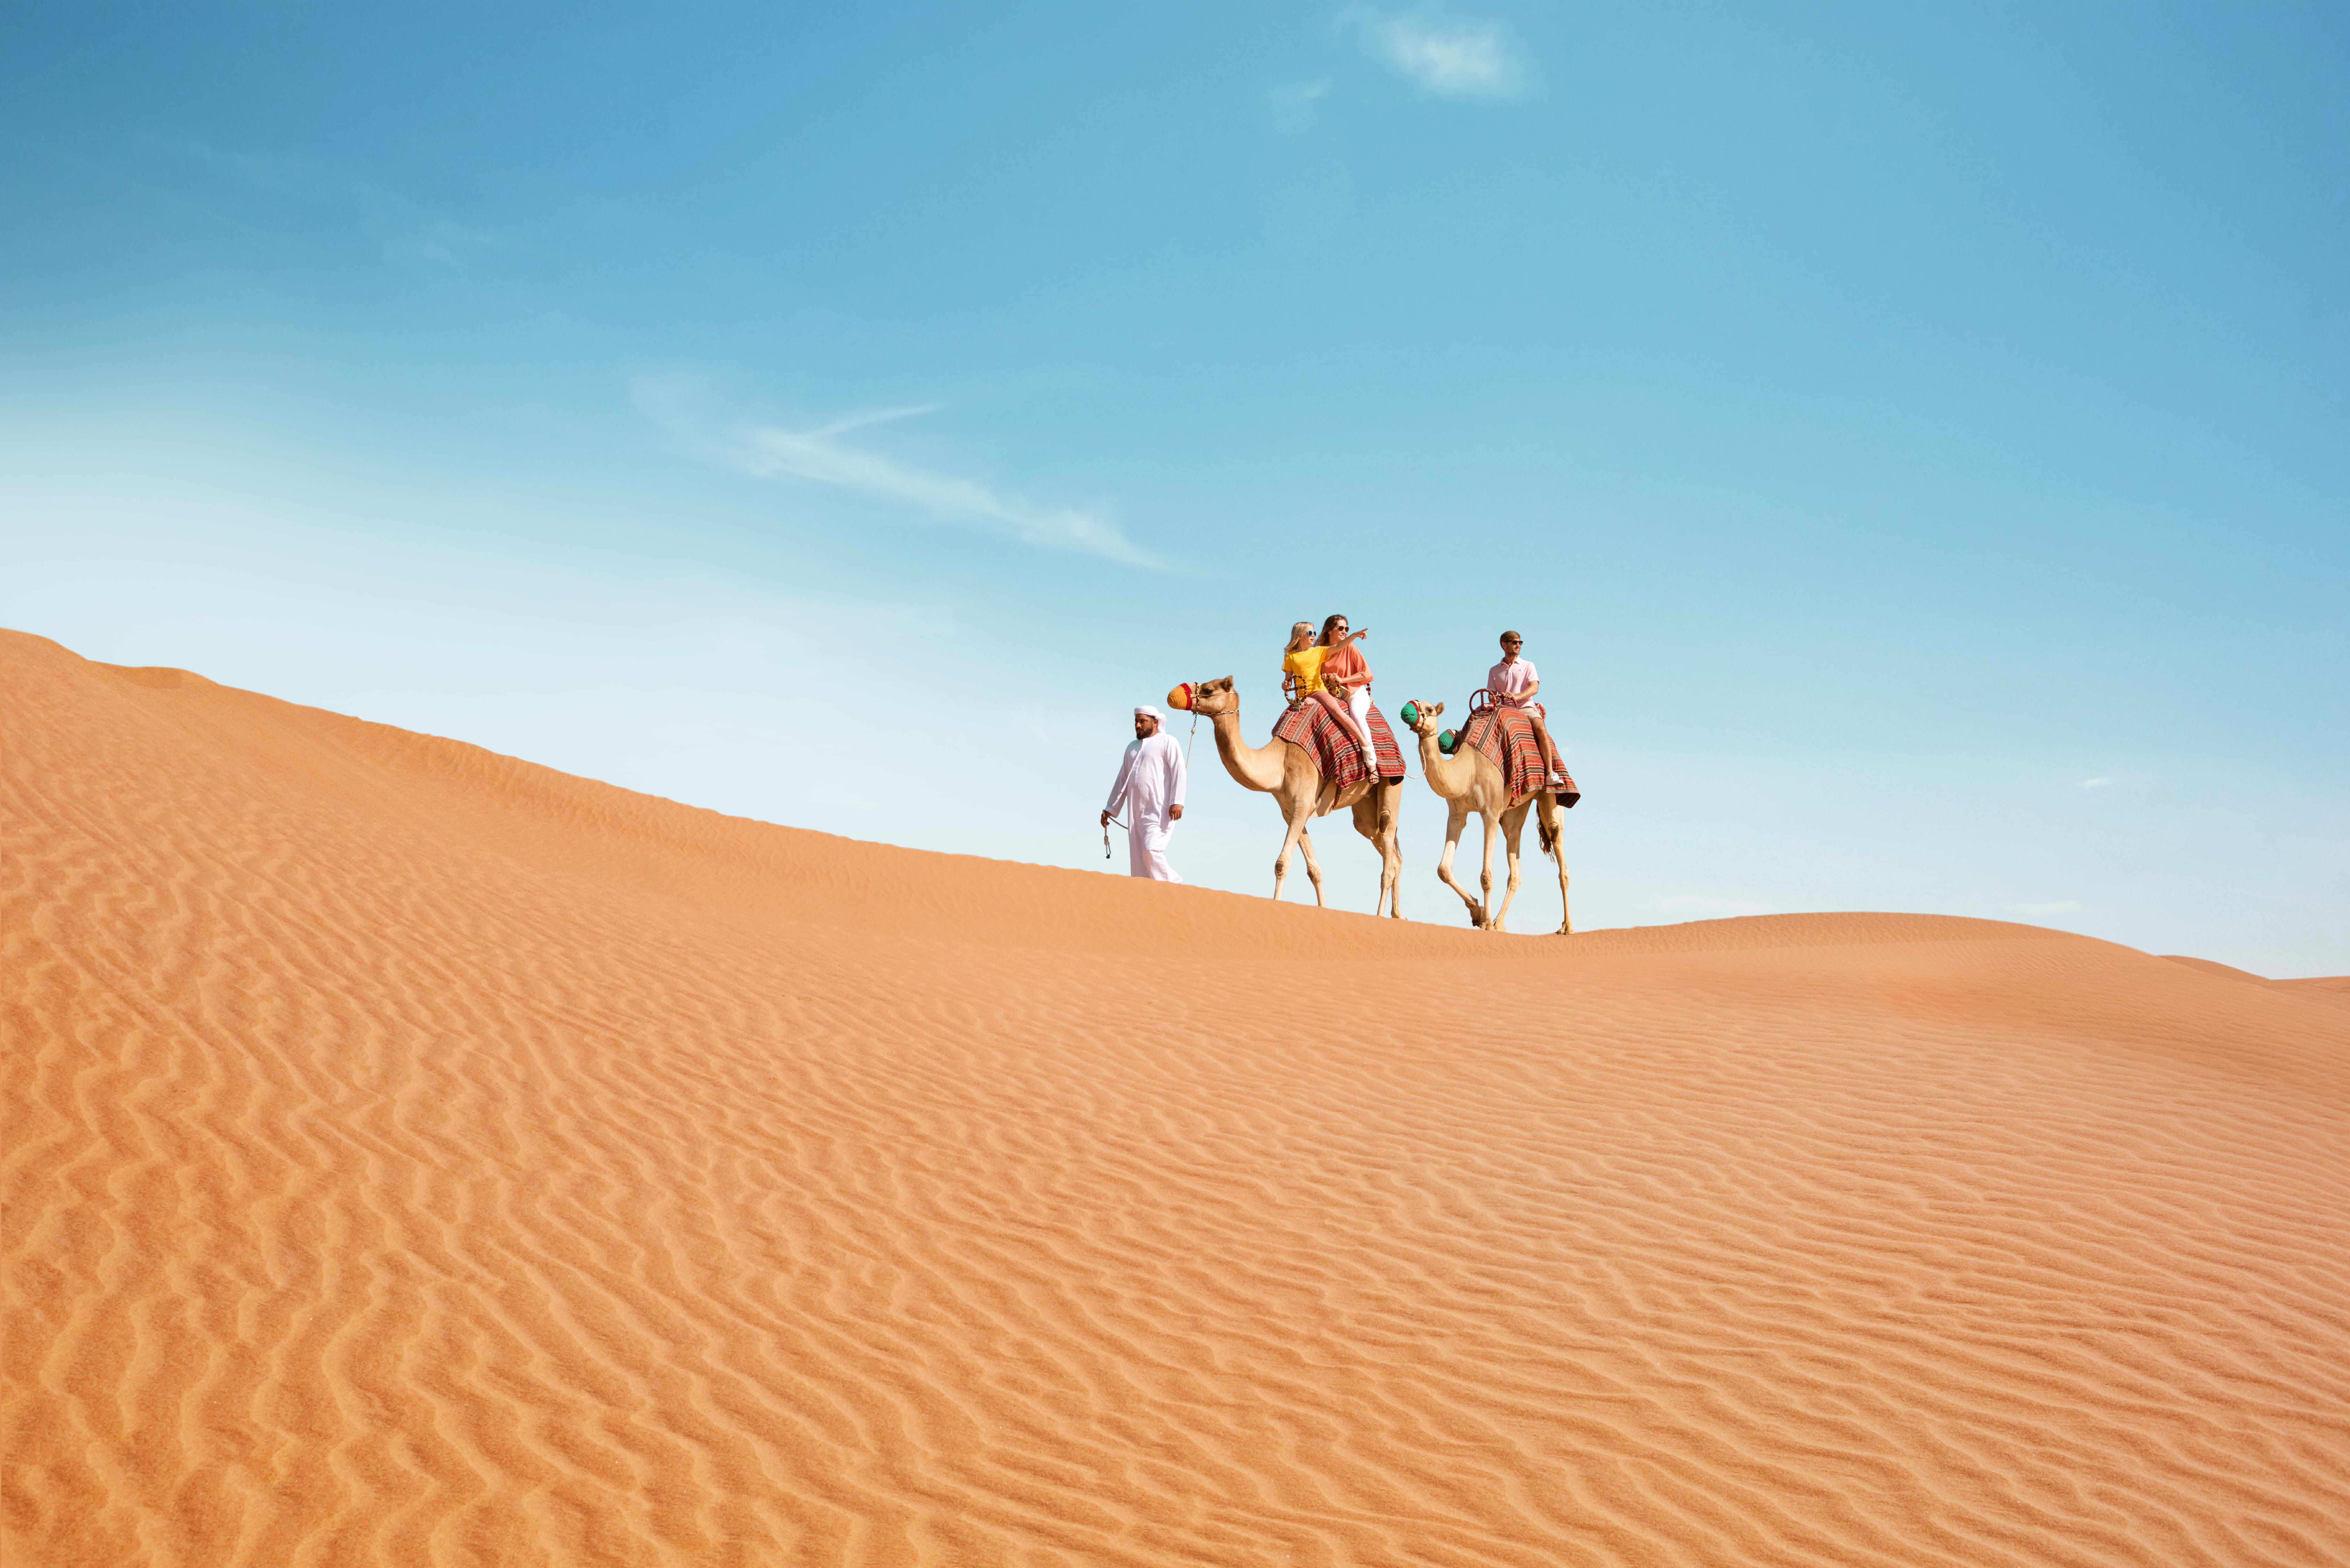 What to expect on your first trip to Dubai